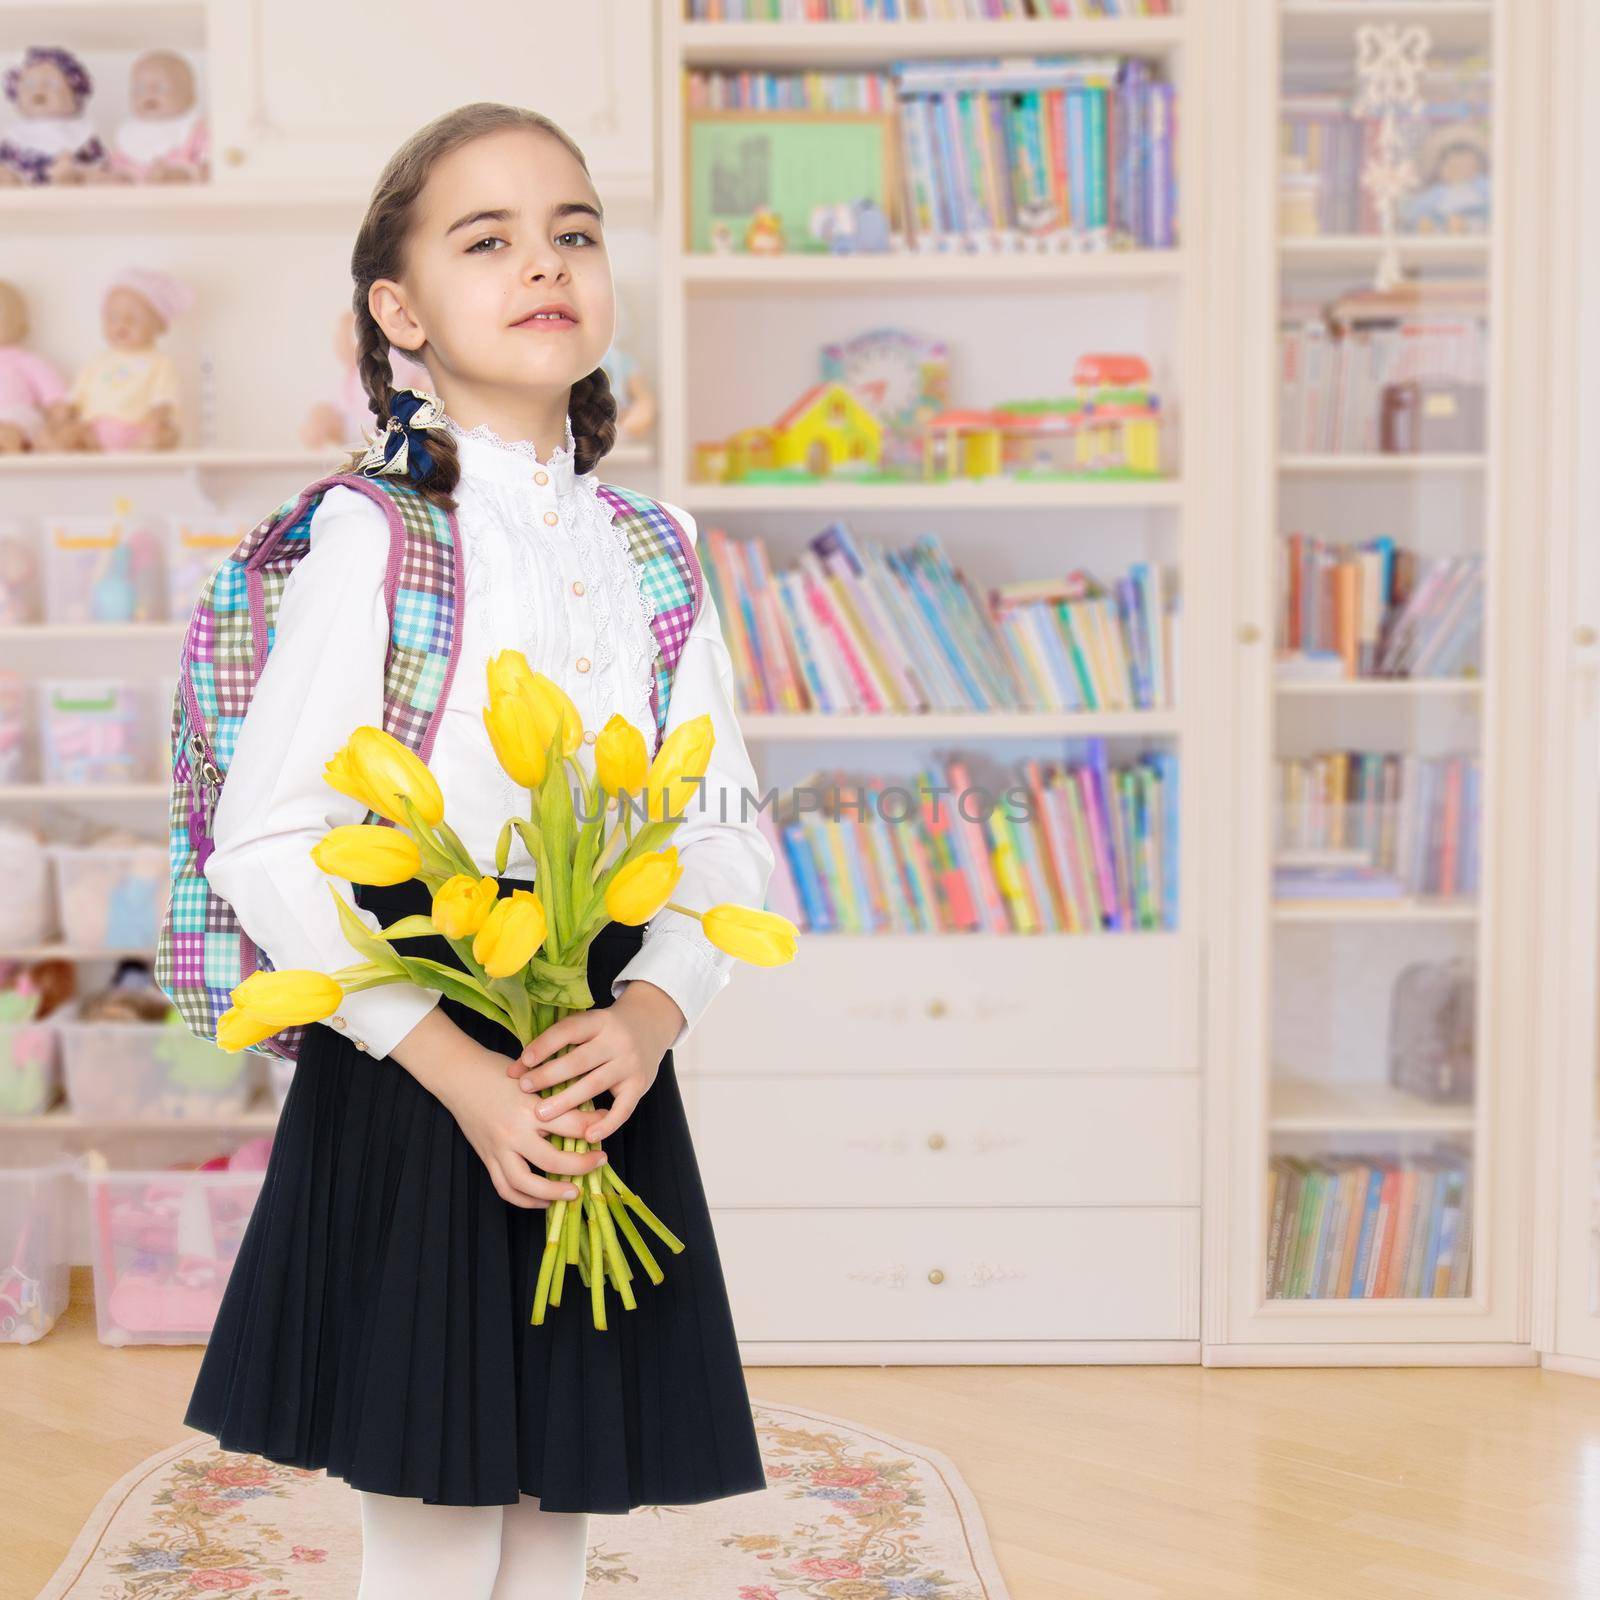 Beautiful little blond schoolgirl, with long neatly braided pigtails. In a white blouse and a long dark skirt.She is holding a bouquet of yellow tulips.In the children's room.